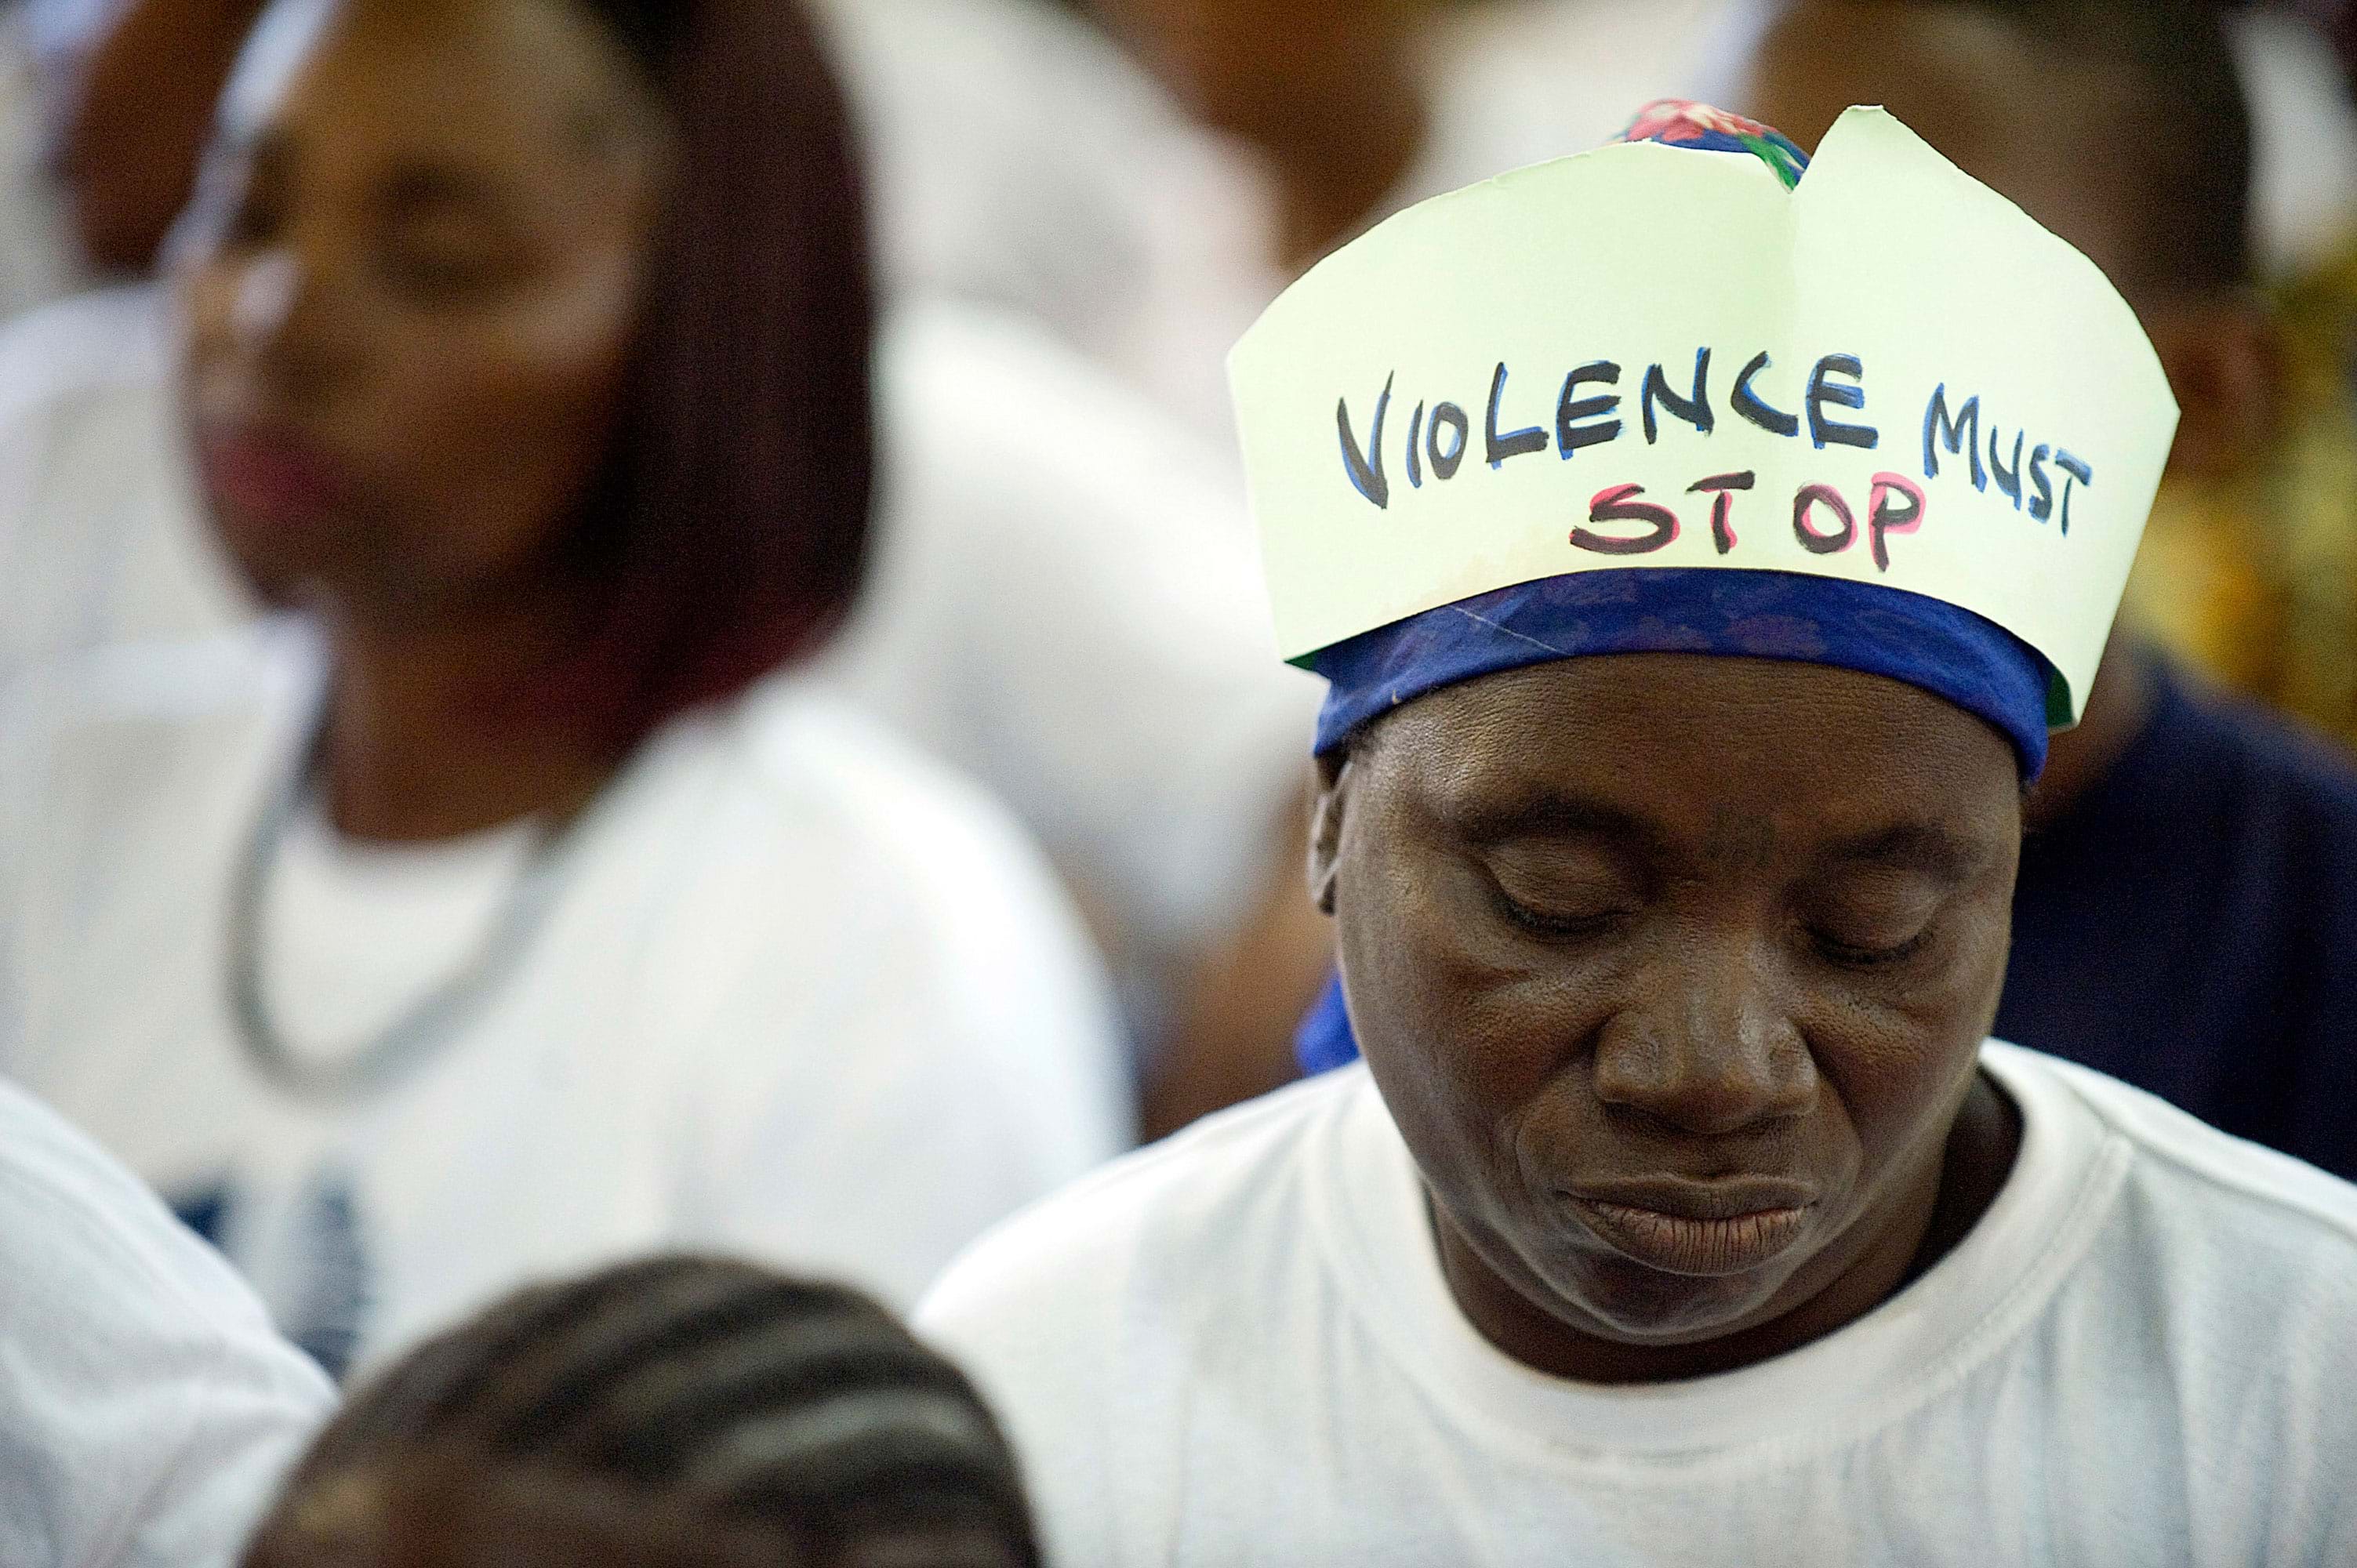 A Black person wears a hat with "Violence Must Stop" handwritten on it.